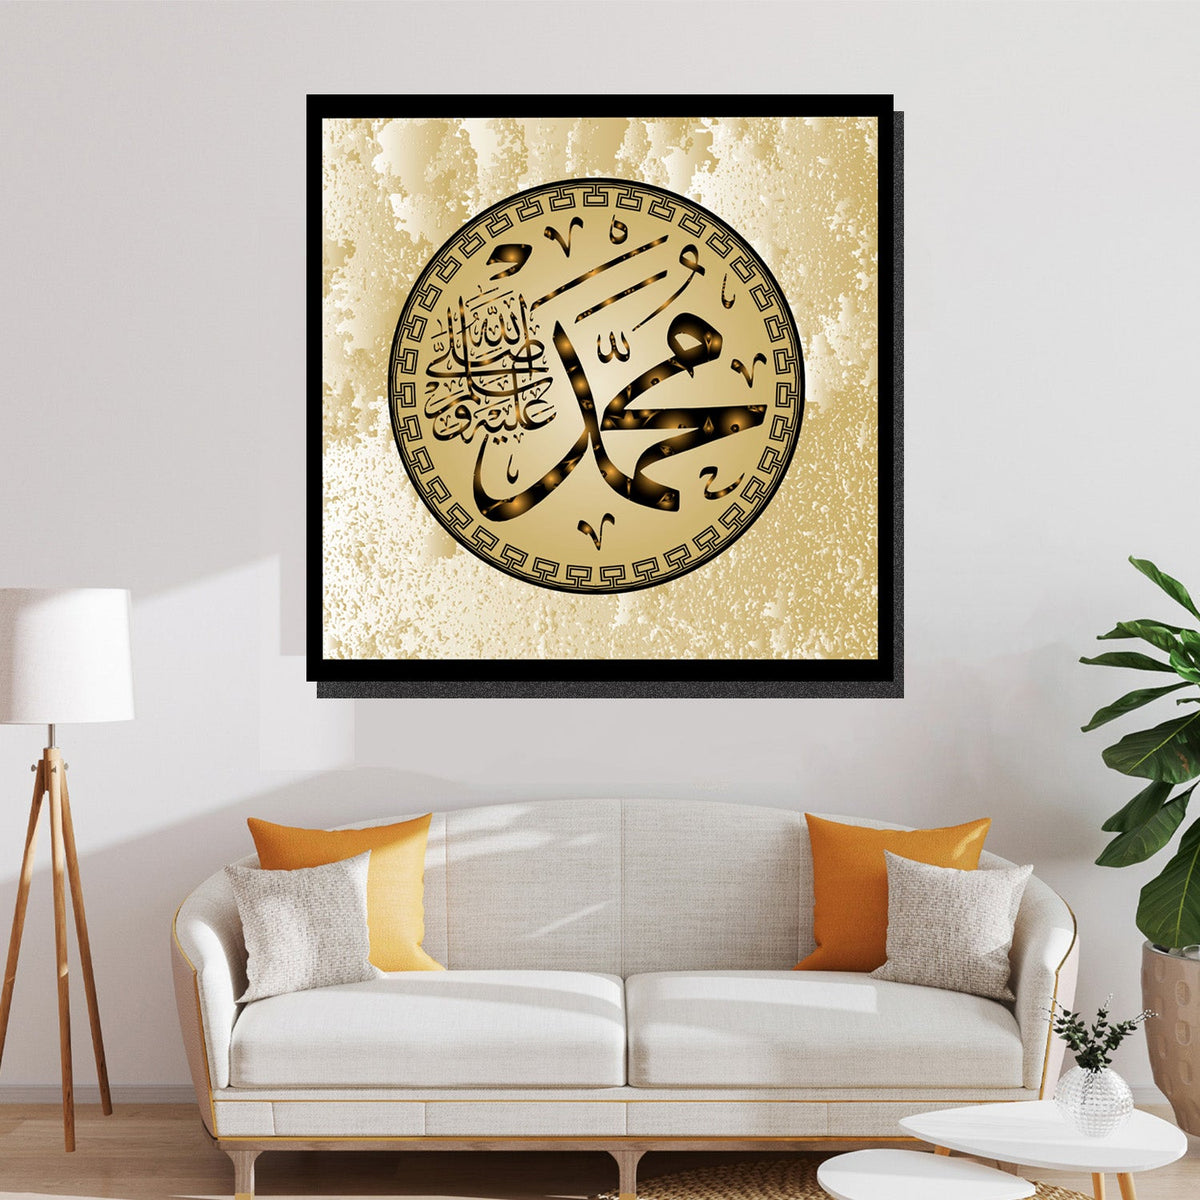 https://cdn.shopify.com/s/files/1/0387/9986/8044/products/IslamicArtLimitedEdition7CanvasArtprintStretched-4.jpg